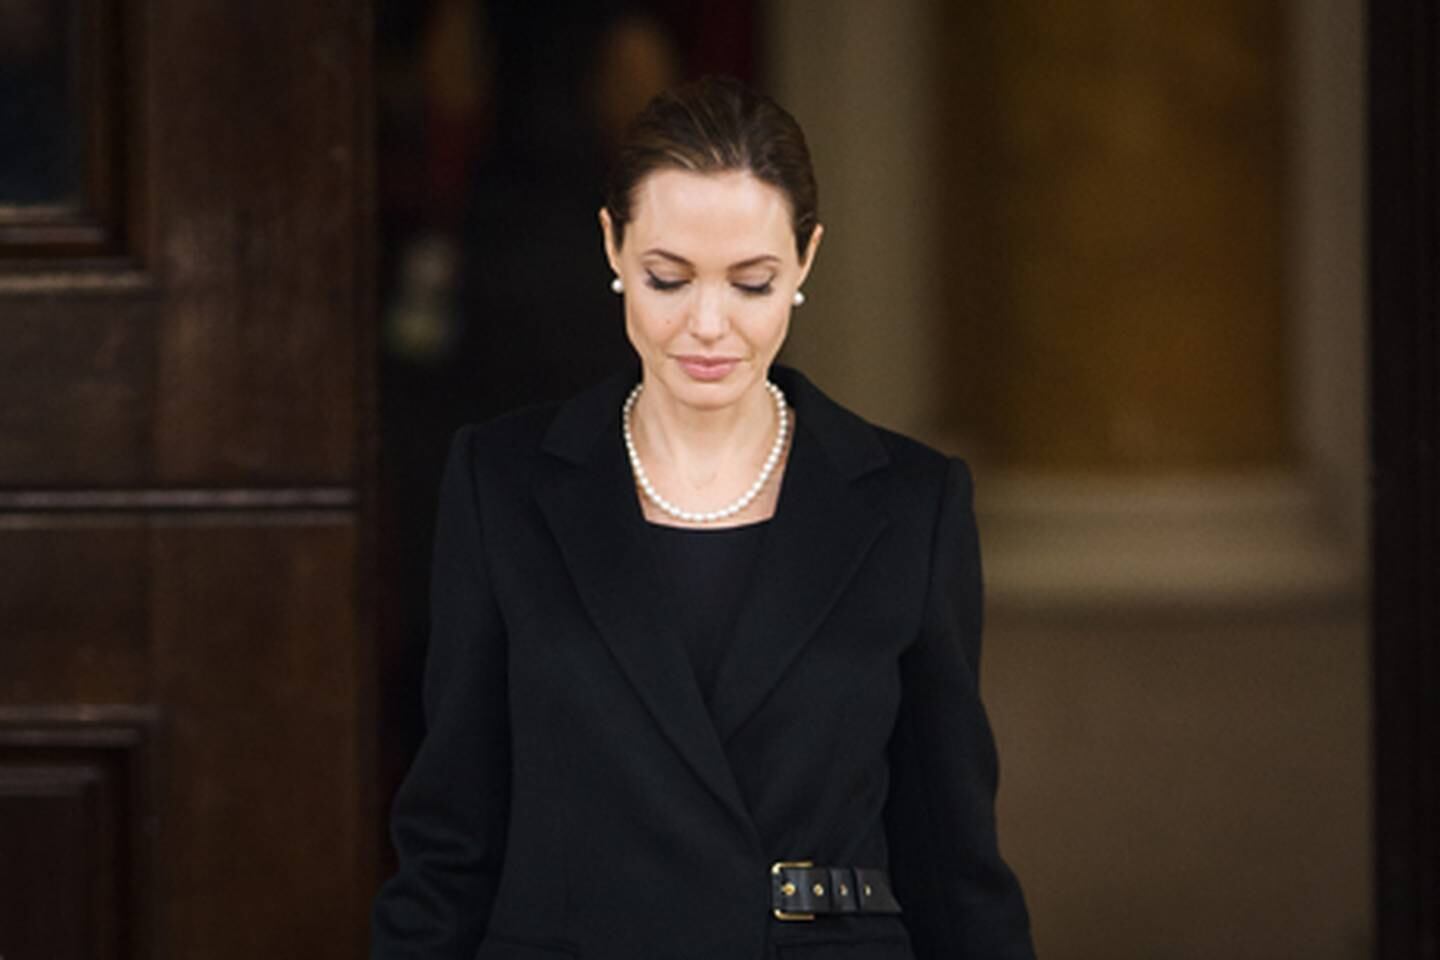 US actress and humanitarian campaigner Angelina Jolie leaves Lancaster House in central London on April 11, 2013 after speaking during an announcement of funding to address conflict sexual violence on the sidelines of the G8 Foreign Ministers meeting. British Foreign Secretary William Hague and Angelina Jolie spoke at the G8 Foreign Minister’s meeting to announce 10 million GBP (15,340,000 USD) funding to support efforts to tackle sexual violence in conflict and violence against women and girls (VAWG). AFP PHOTO / LEON NEAL